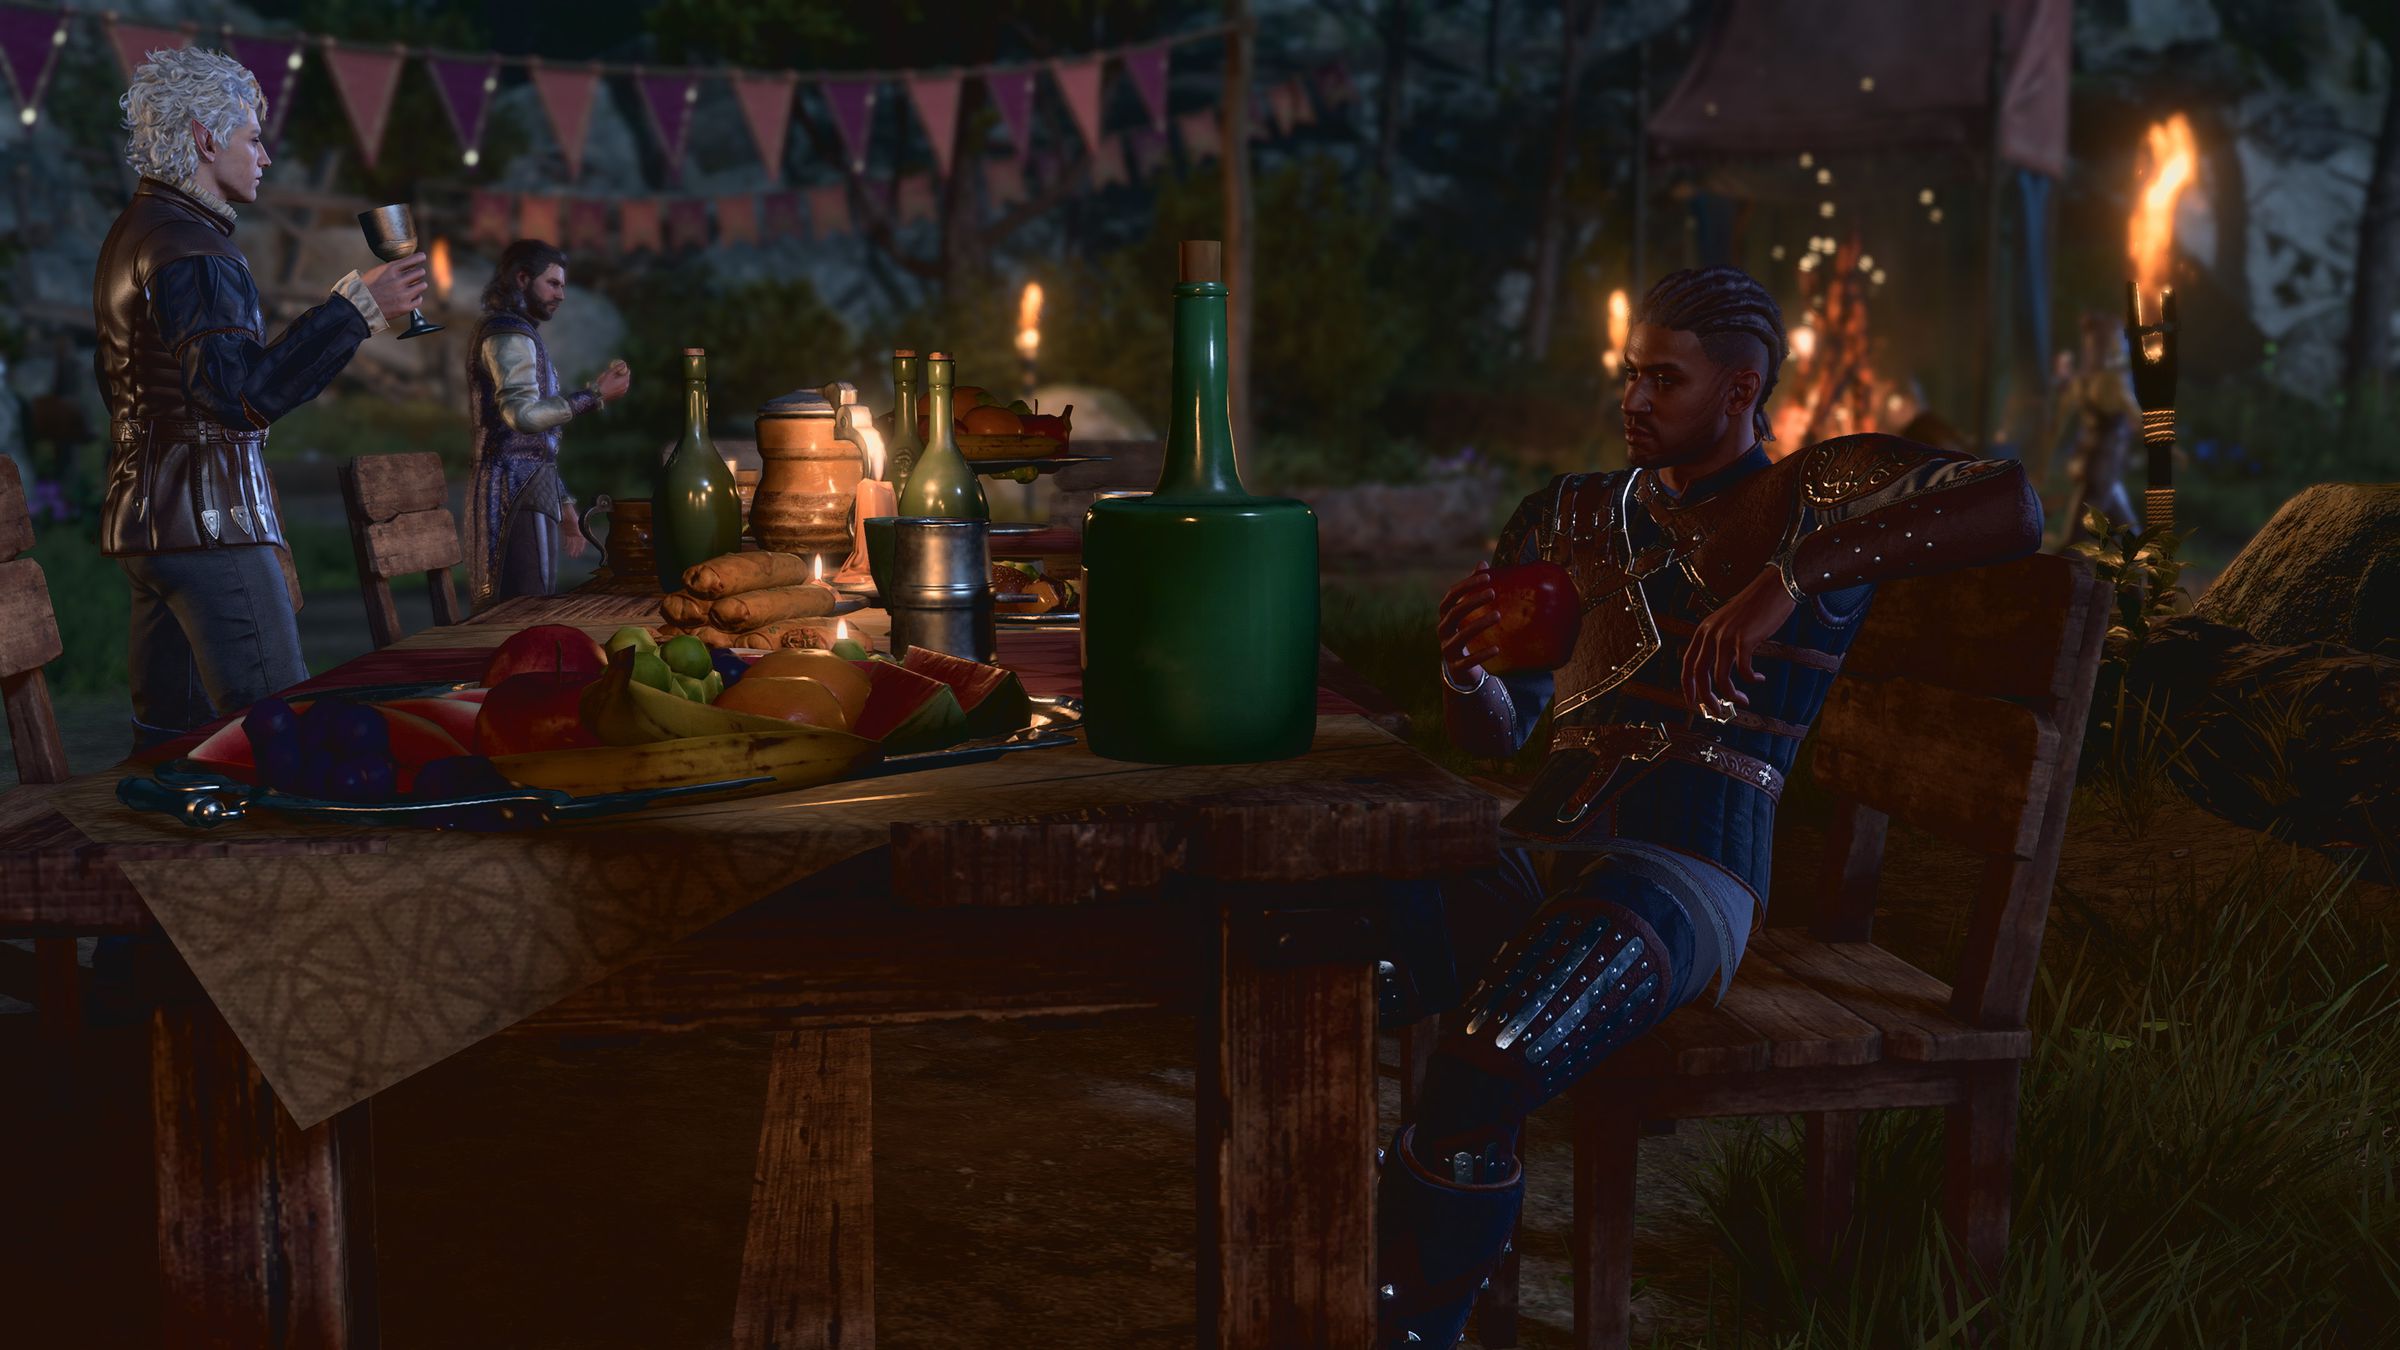 Screenshot from Baldur’蝉 Gate 3 featuring the character Wyll in new camp clothes sitting at a table covered in food and wine for a feast while the character Astarion holds a goblet of wine in the background.